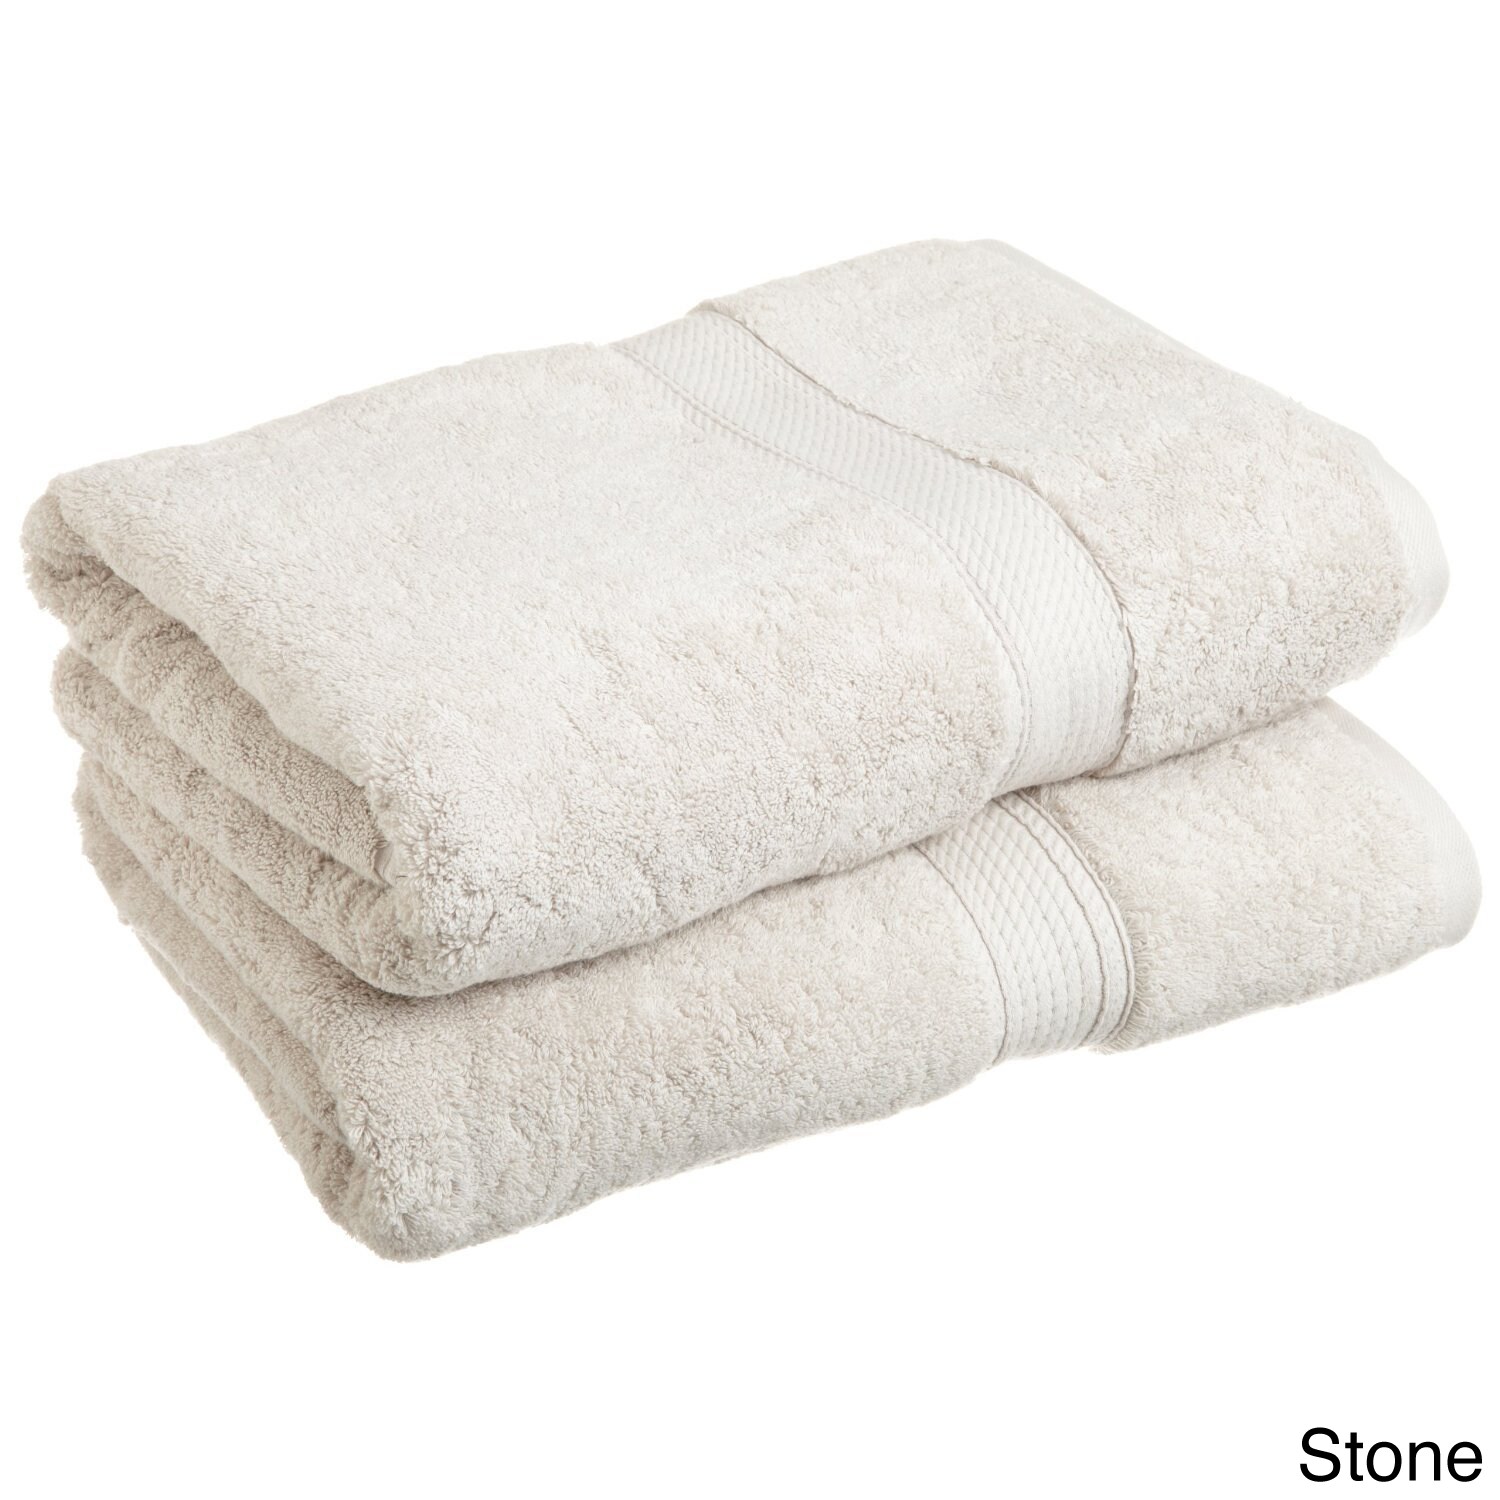 https://ak1.ostkcdn.com/images/products/5840793/Superior-Collection-Luxurious-900-GSM-Egyptian-Cotton-Bath-Towels-Set-of-2-f20cc4ee-4483-404d-8bb5-811b76cceb15.jpg